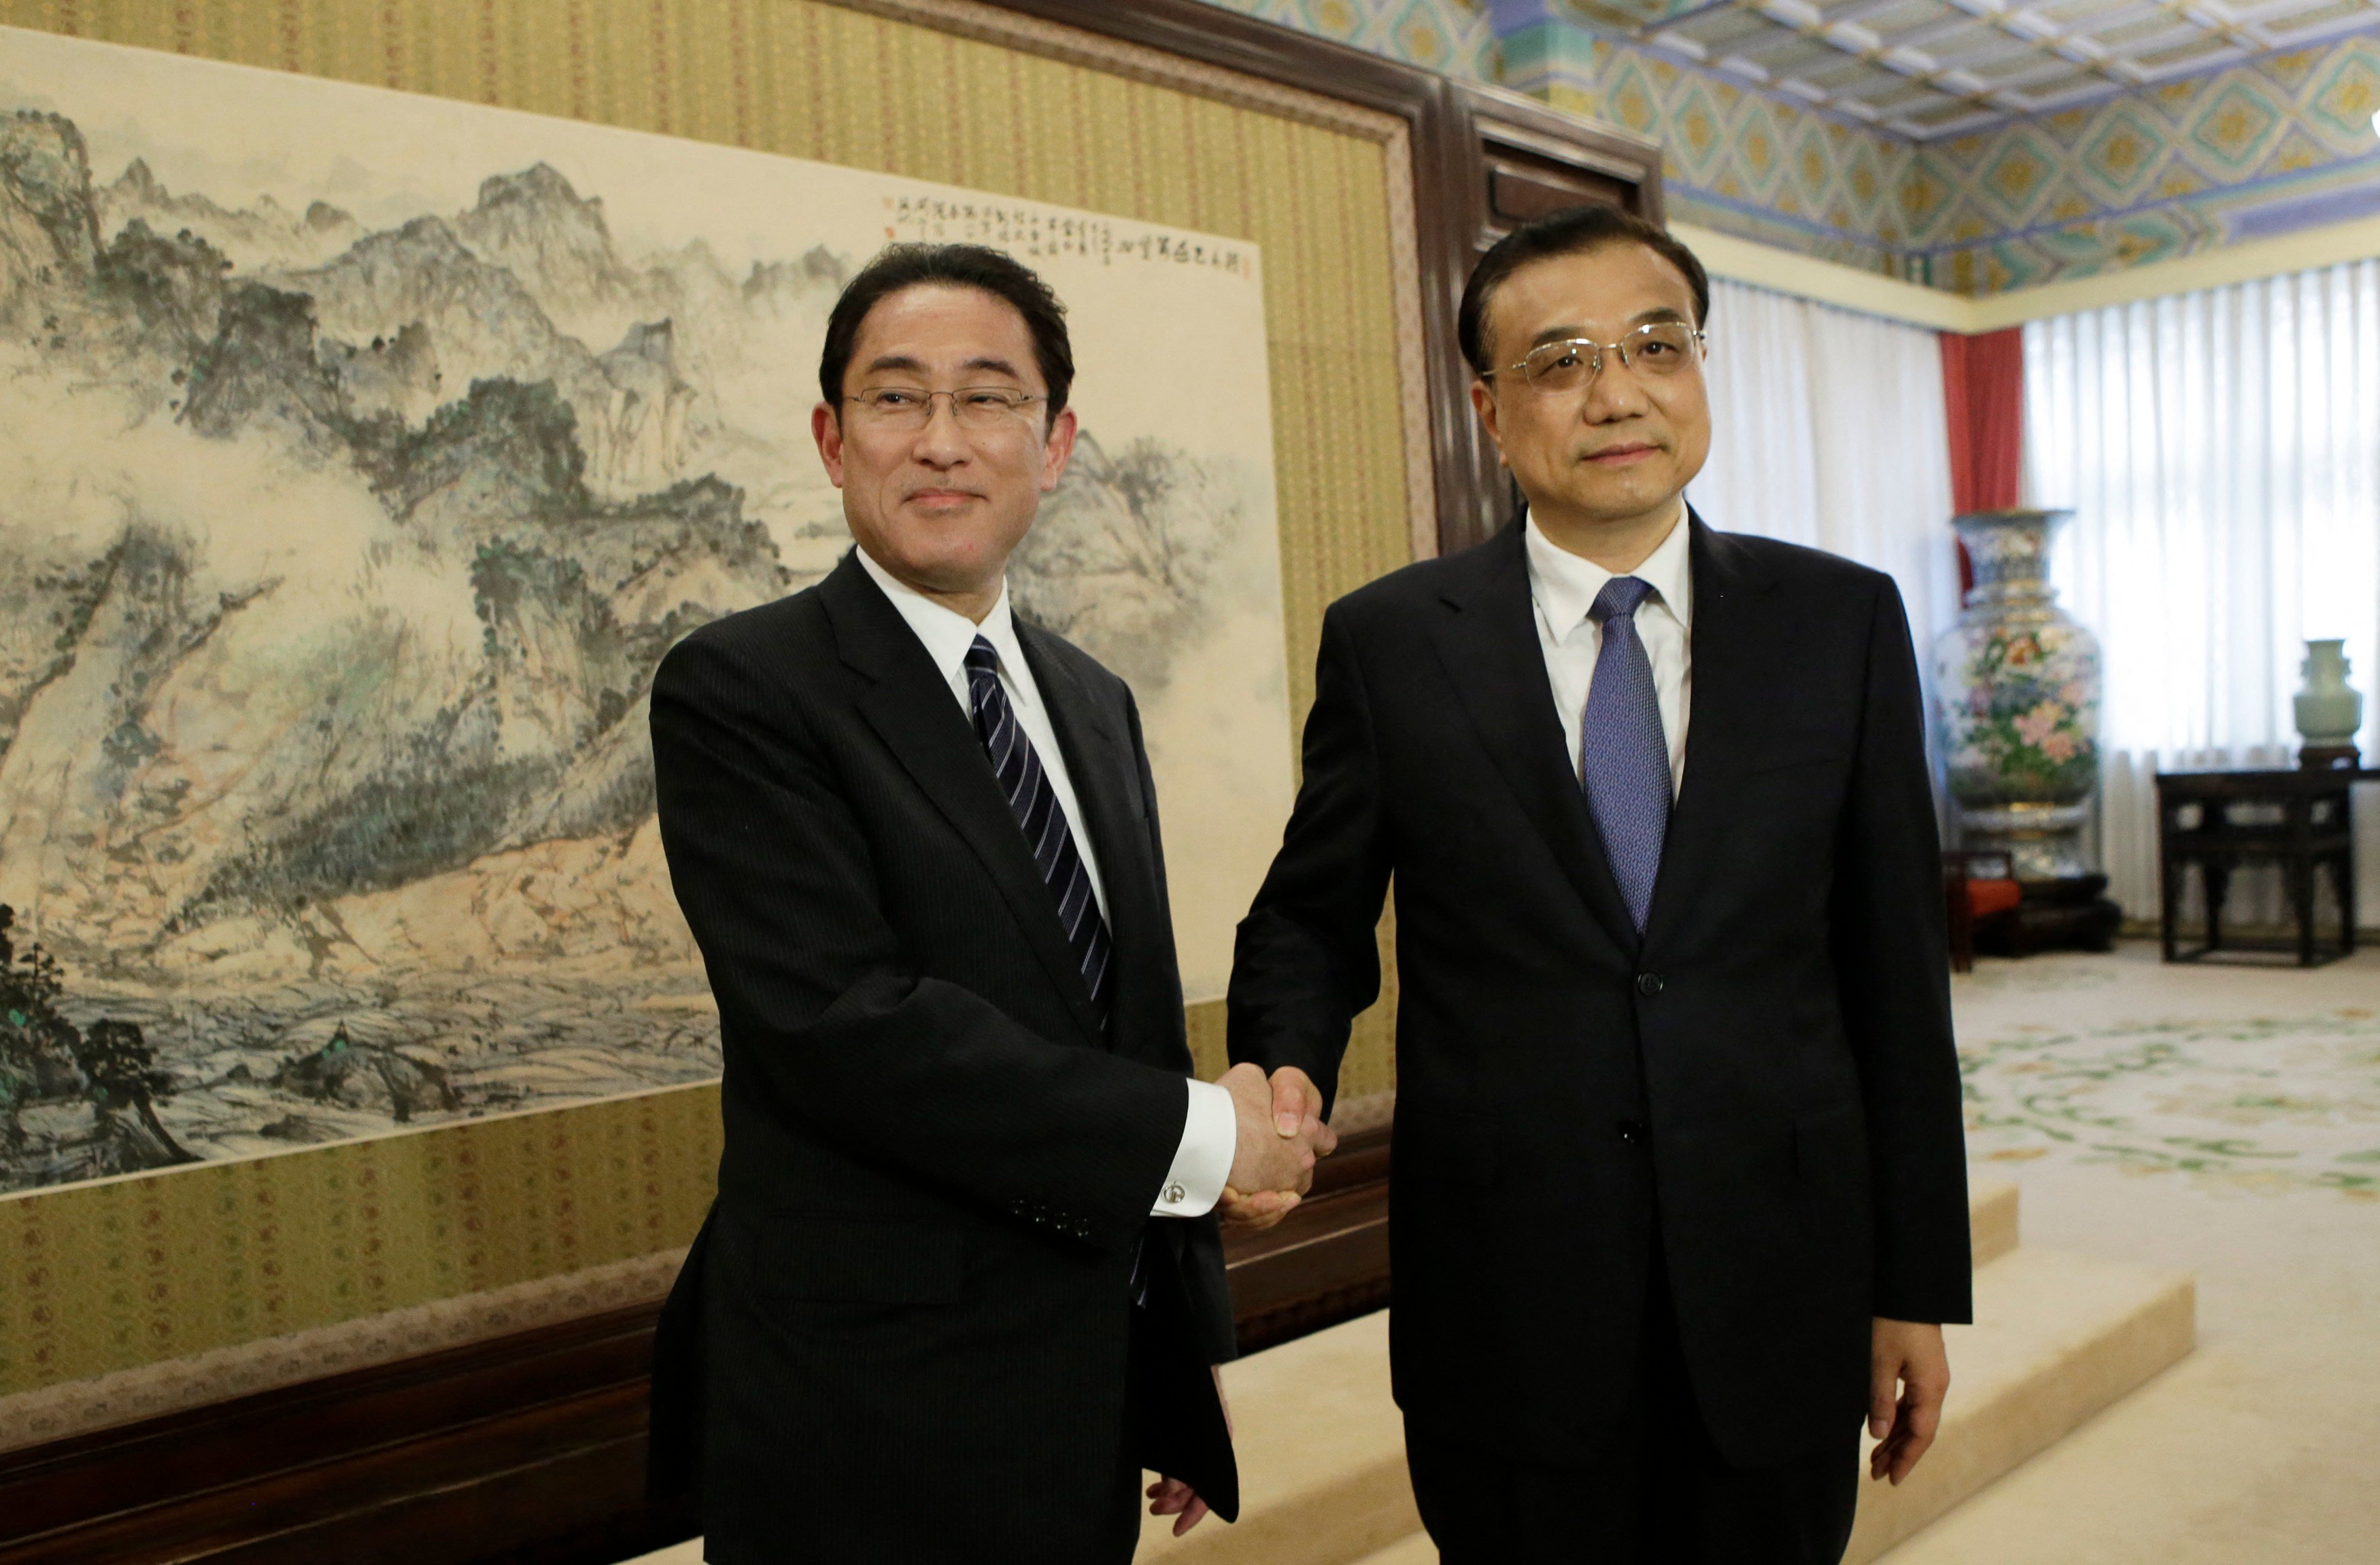 Then Japanese Foreign Minister Fumio Kishida (left) with Chinese Premier Li Keqiang in Beijing on April 30, 2016. Kishida, Japan’s current PM, has paid tribute to Li following the ex-premier’s death last Friday. Photo: AFP